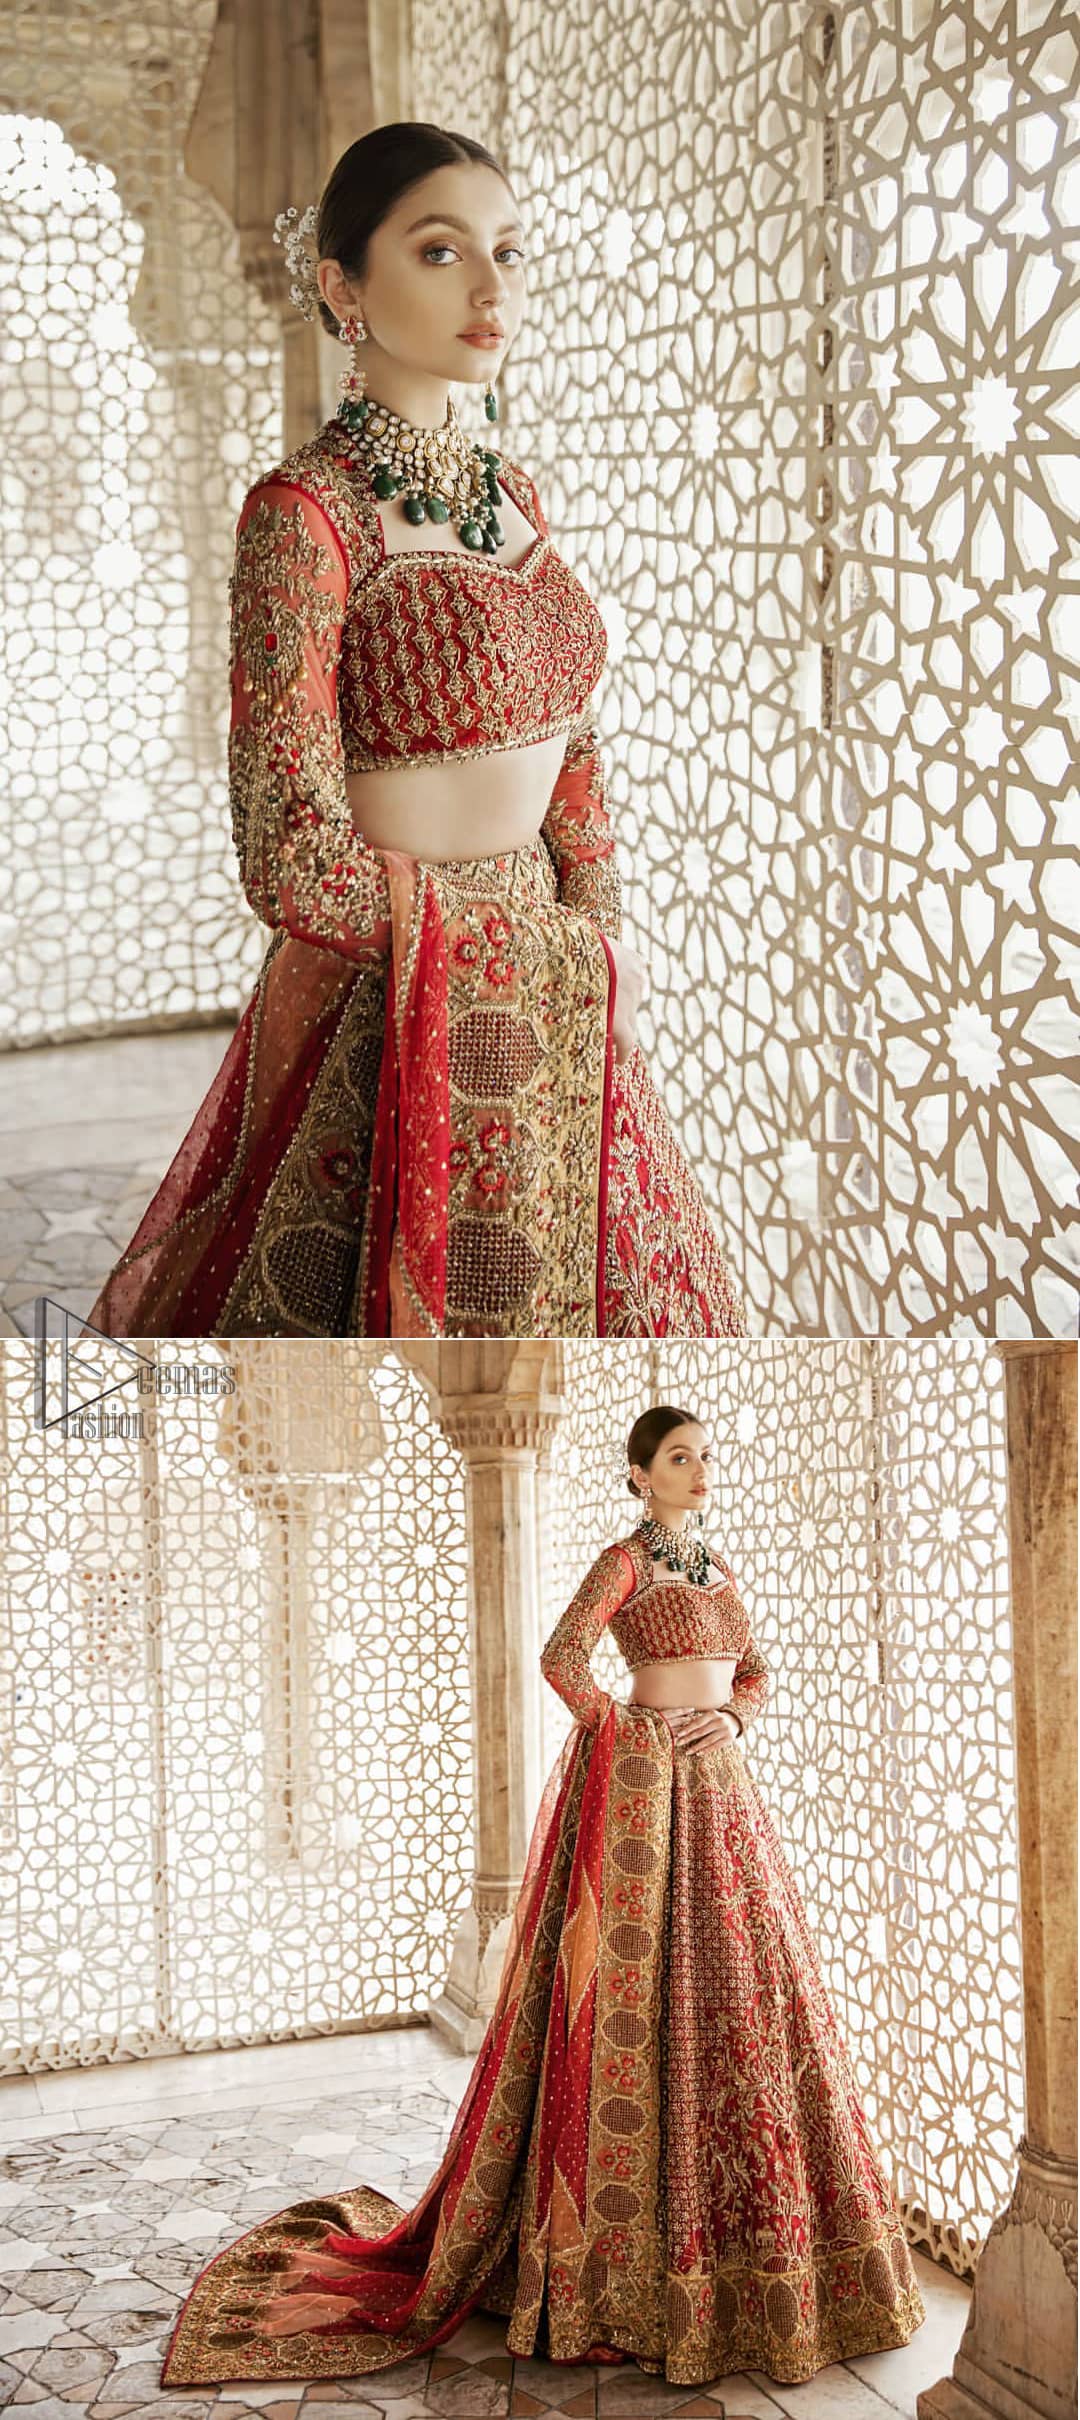 Classic, timeless and truly beautiful, our bridal dress is perfect for your unforgettable day. This exceptionally detailed dress is cut in a seductive fit and flare silhouette that’s sure to turn heads. The blouse is adorned with antique shaded kora, dabka, tilla, kundan, sequins and pearls. Coordinated with traditional red lehenga having geometric patterns and floral embroidery ornamented with antique shaded zardozi work. The hemline is also adorned with vibrant floral motifs. Elegance is personified when it gets paired up with red organza dupatta having four sided thick embellished border.